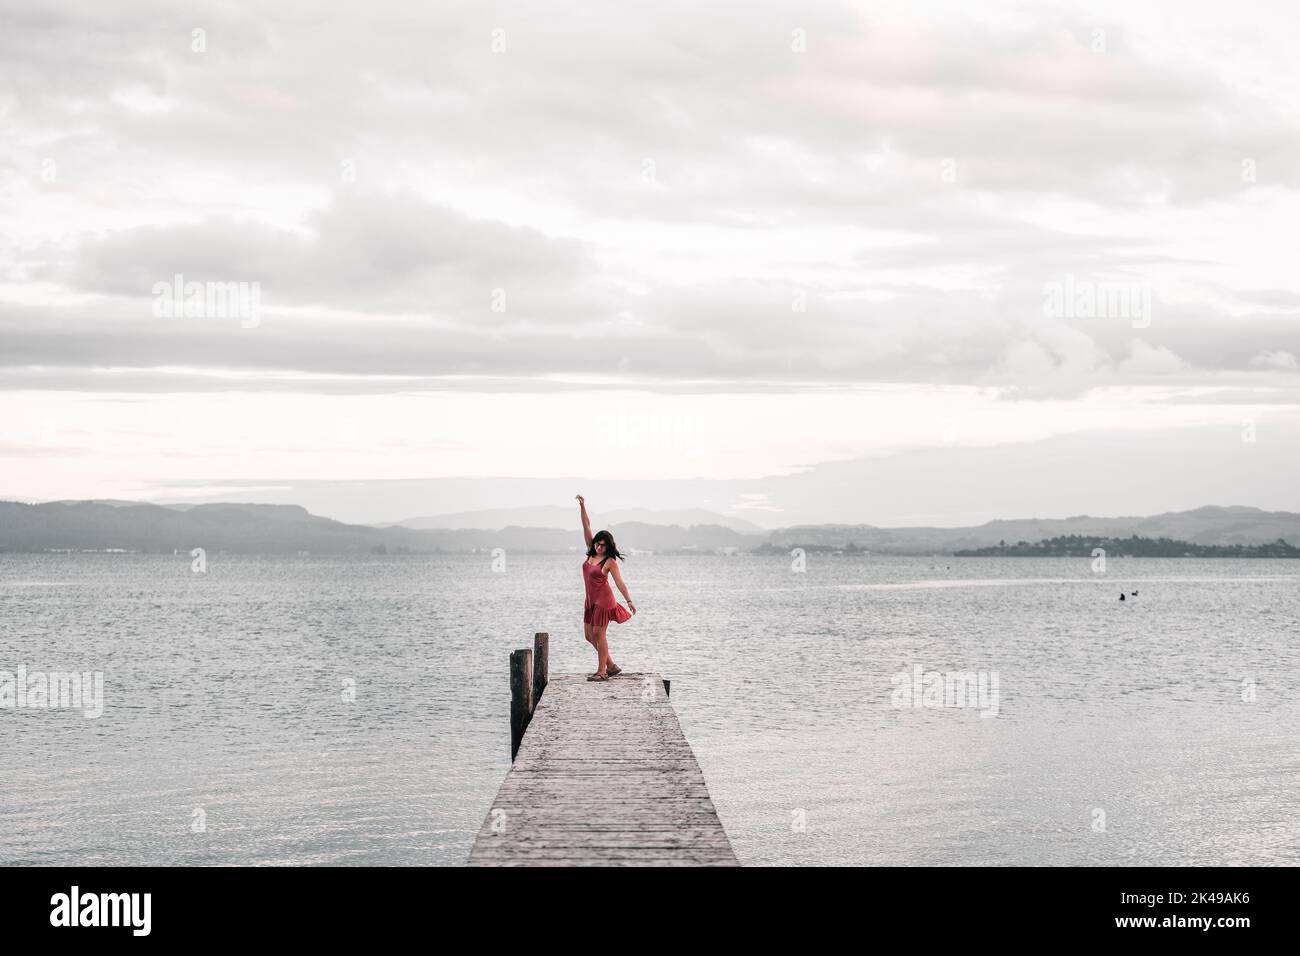 Young caucasian girl wearing sandals glasses and a pink dress dancing with her arm raised on the lake pier under the clouds in Okere, new zealand Stock Photo